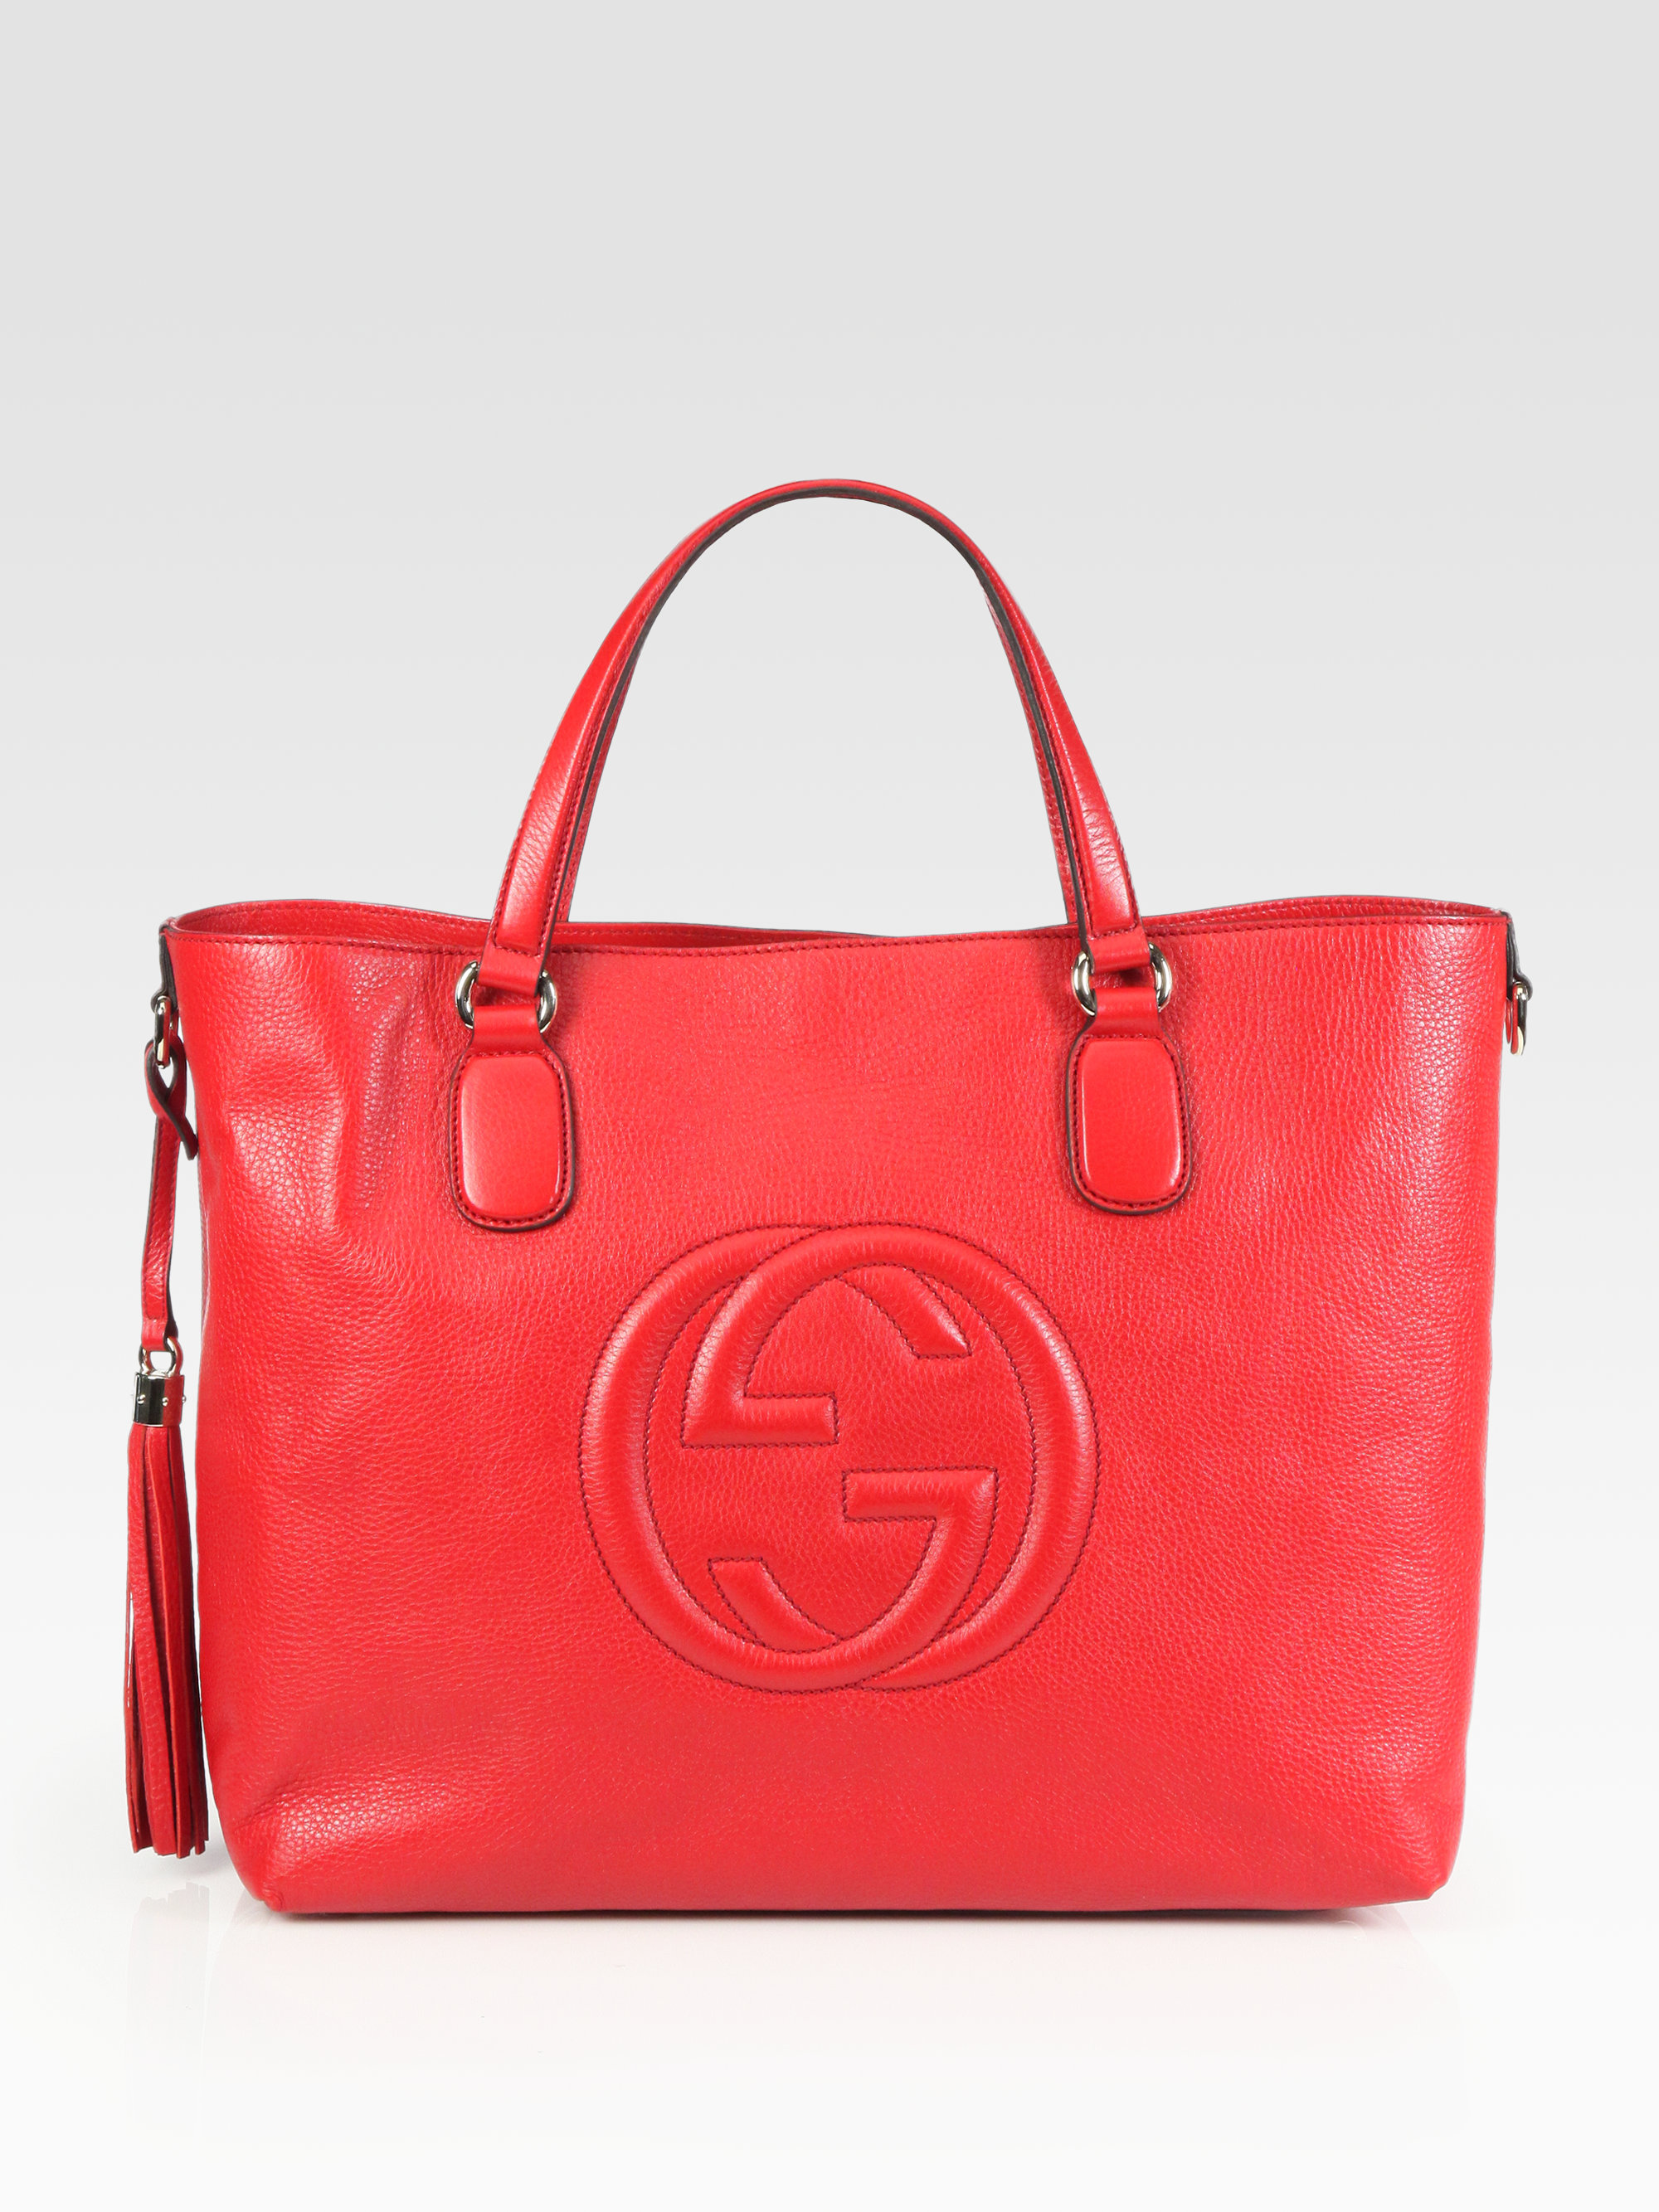 Lyst - Gucci Soho Medium Tote Bag in Red